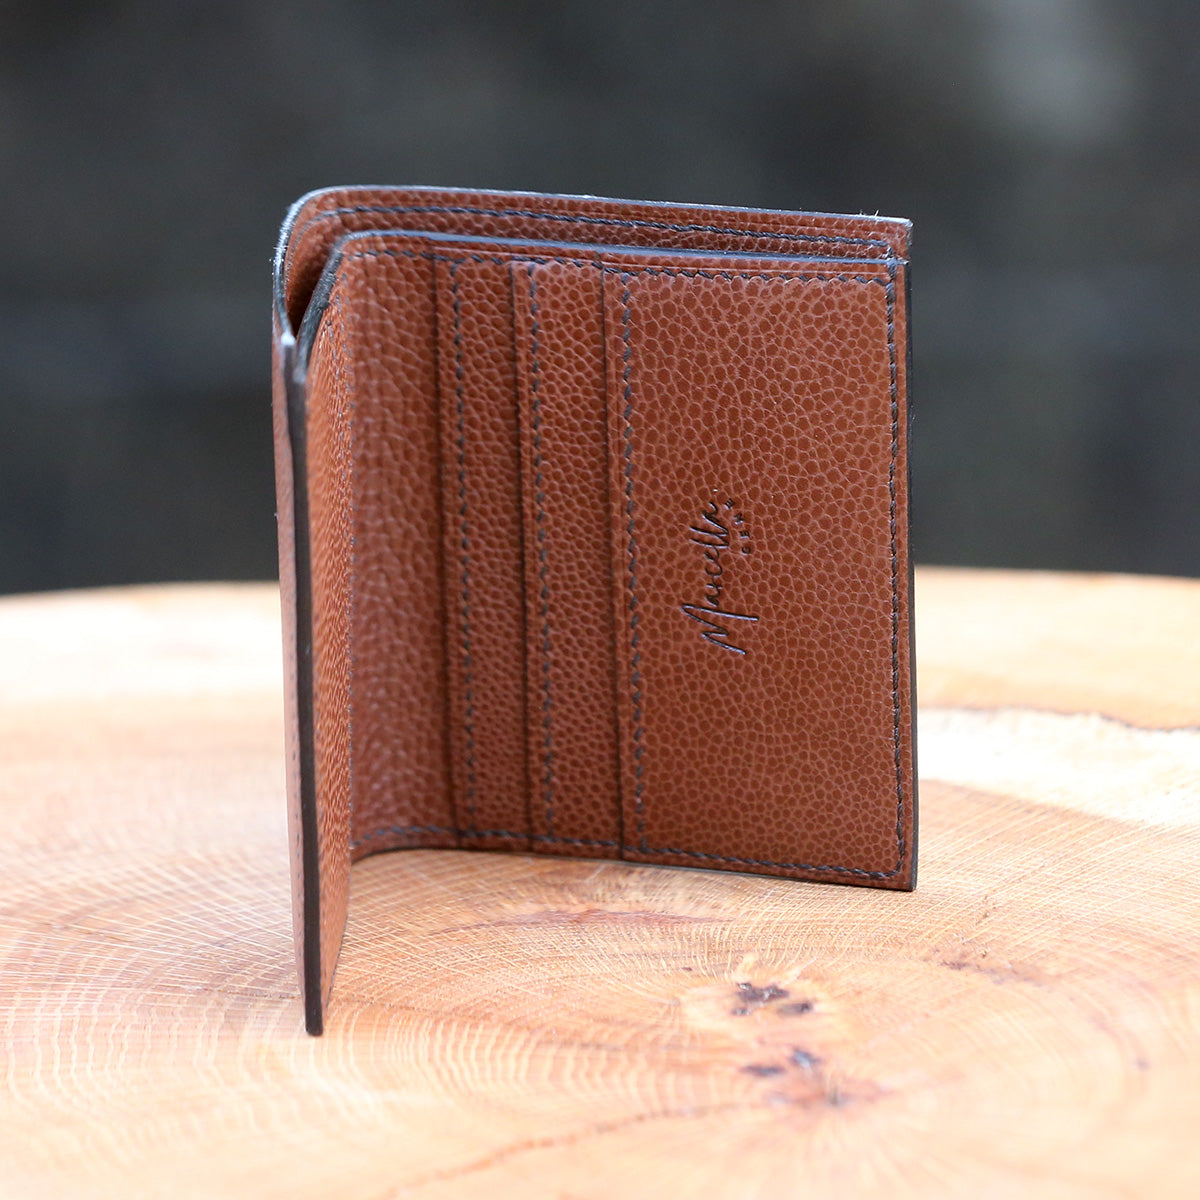 The London Wallet